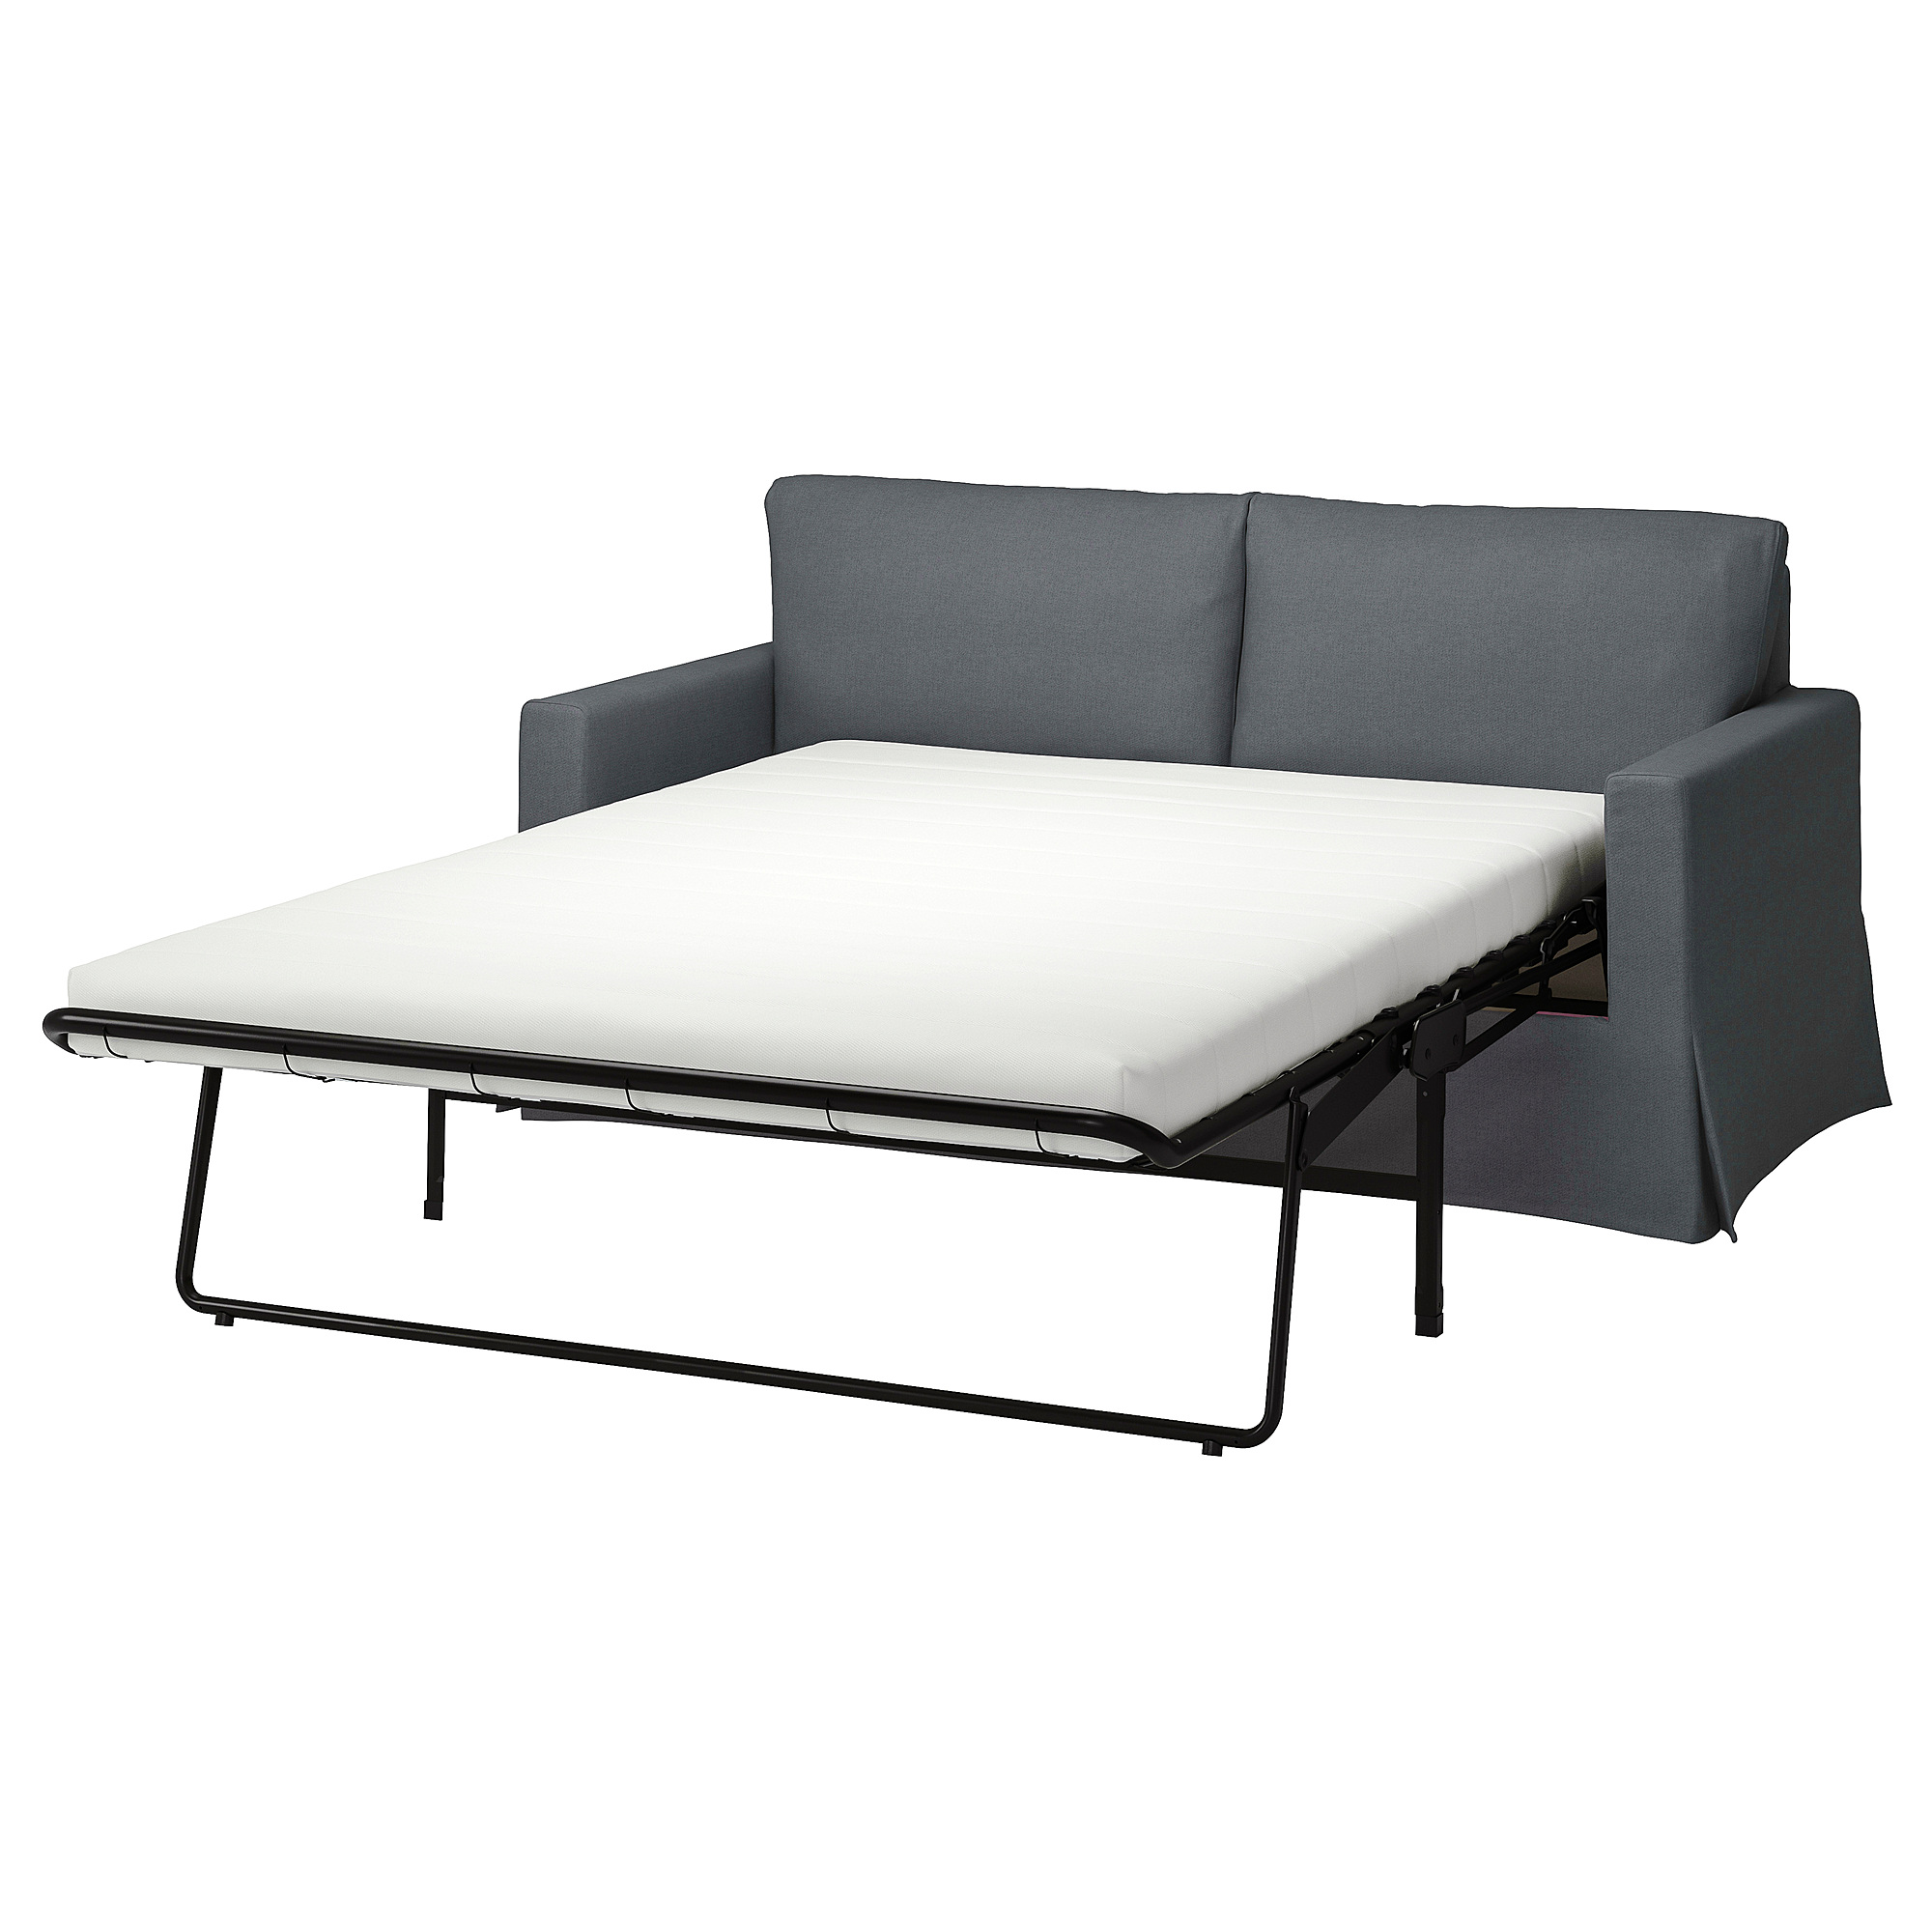 HYLTARP cover for 2-seat sofa-bed